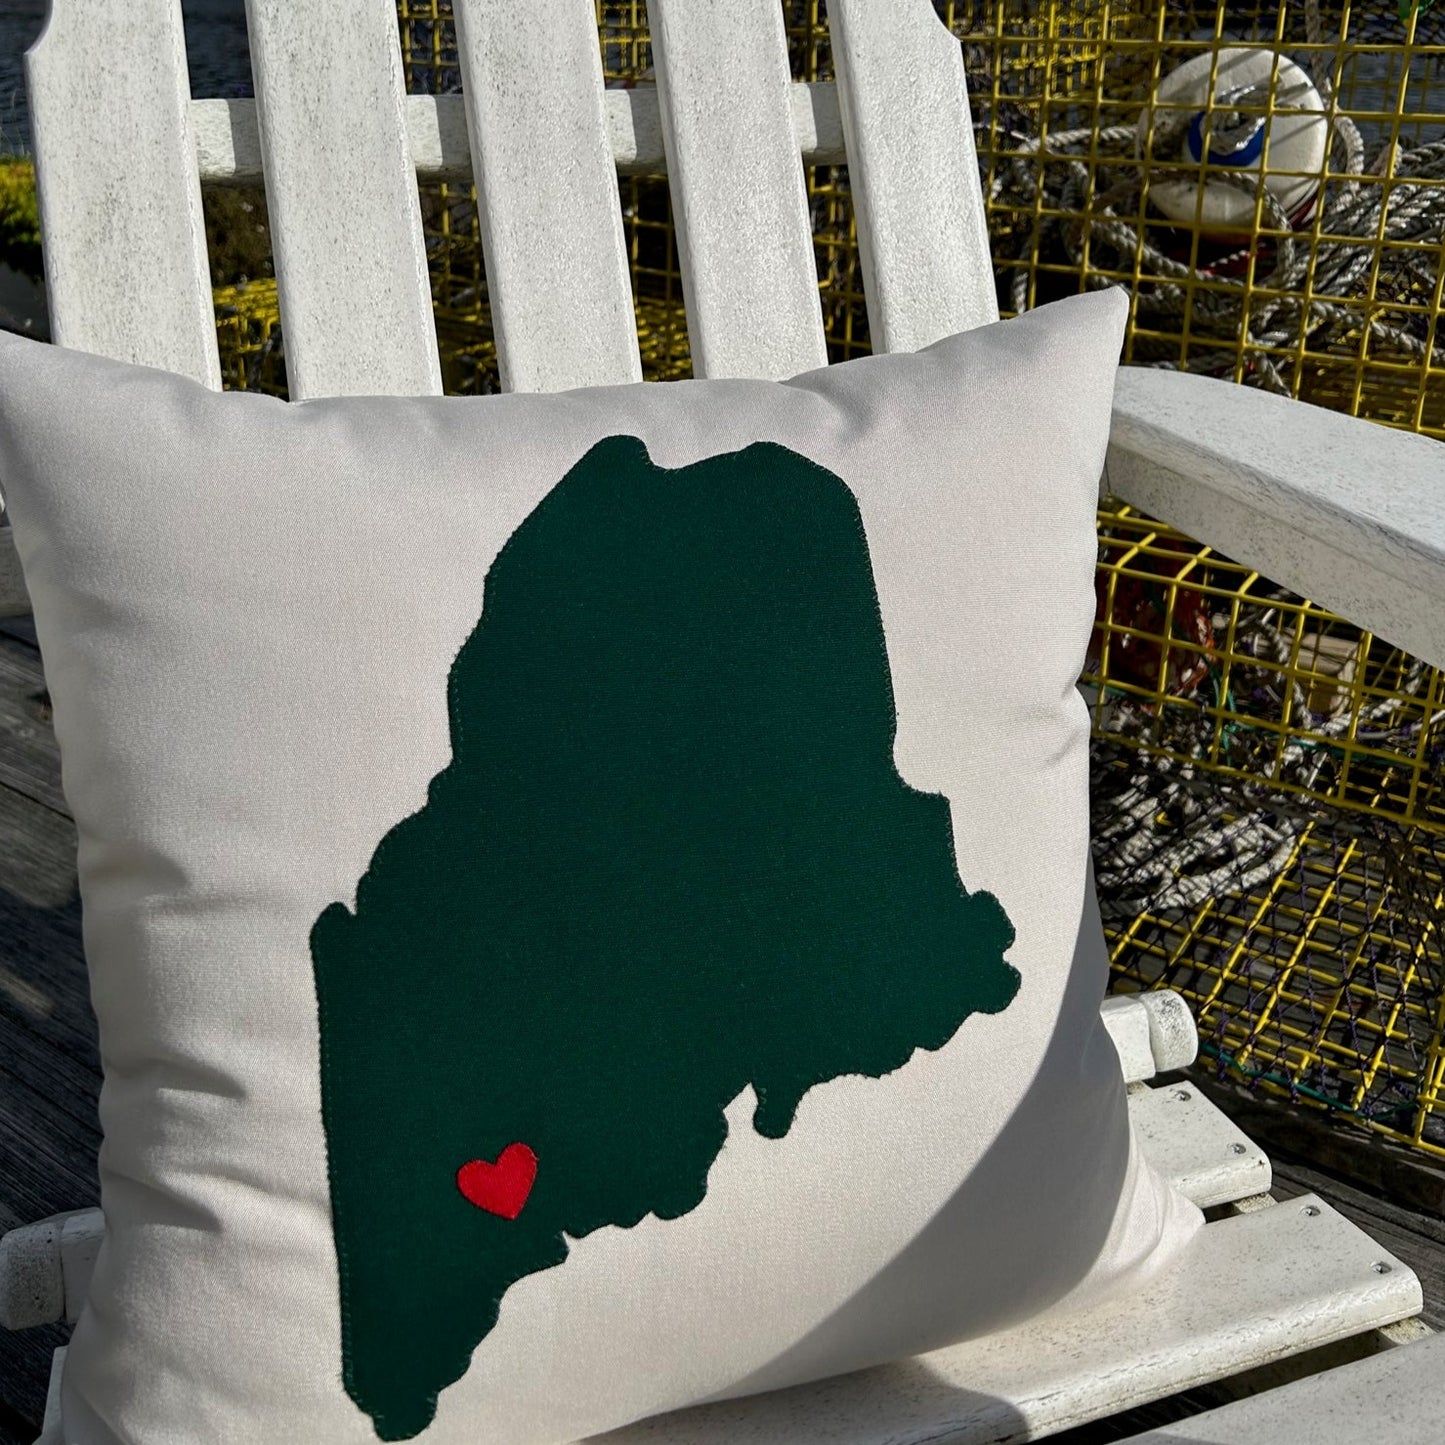 Maine State Lewiston Heart pillow